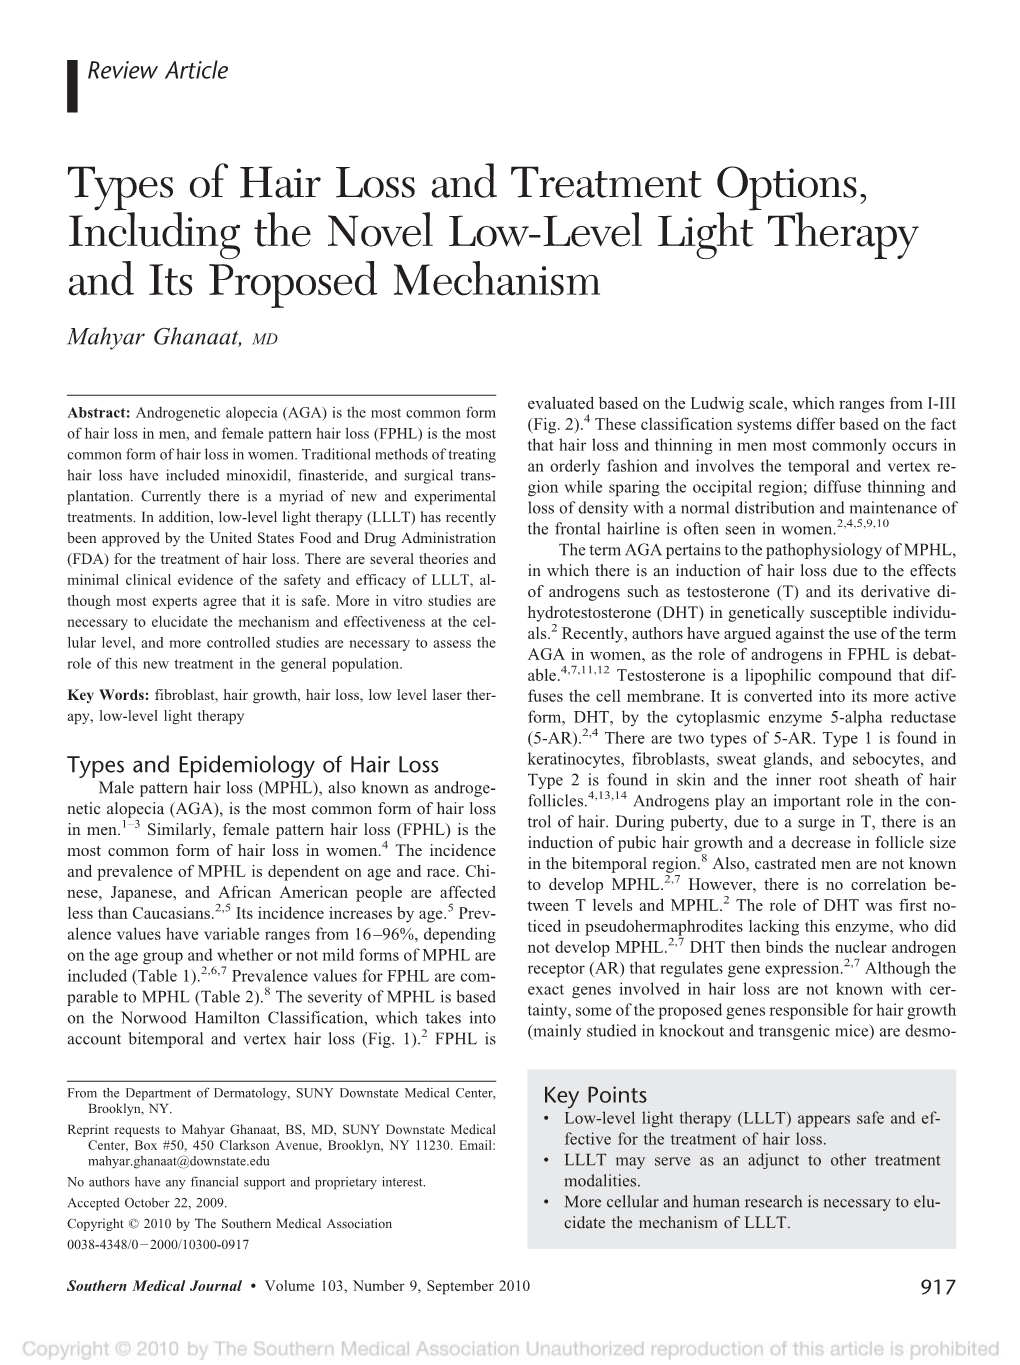 Types of Hair Loss and Treatment Options, Including the Novel Low-Level Light Therapy and Its Proposed Mechanism